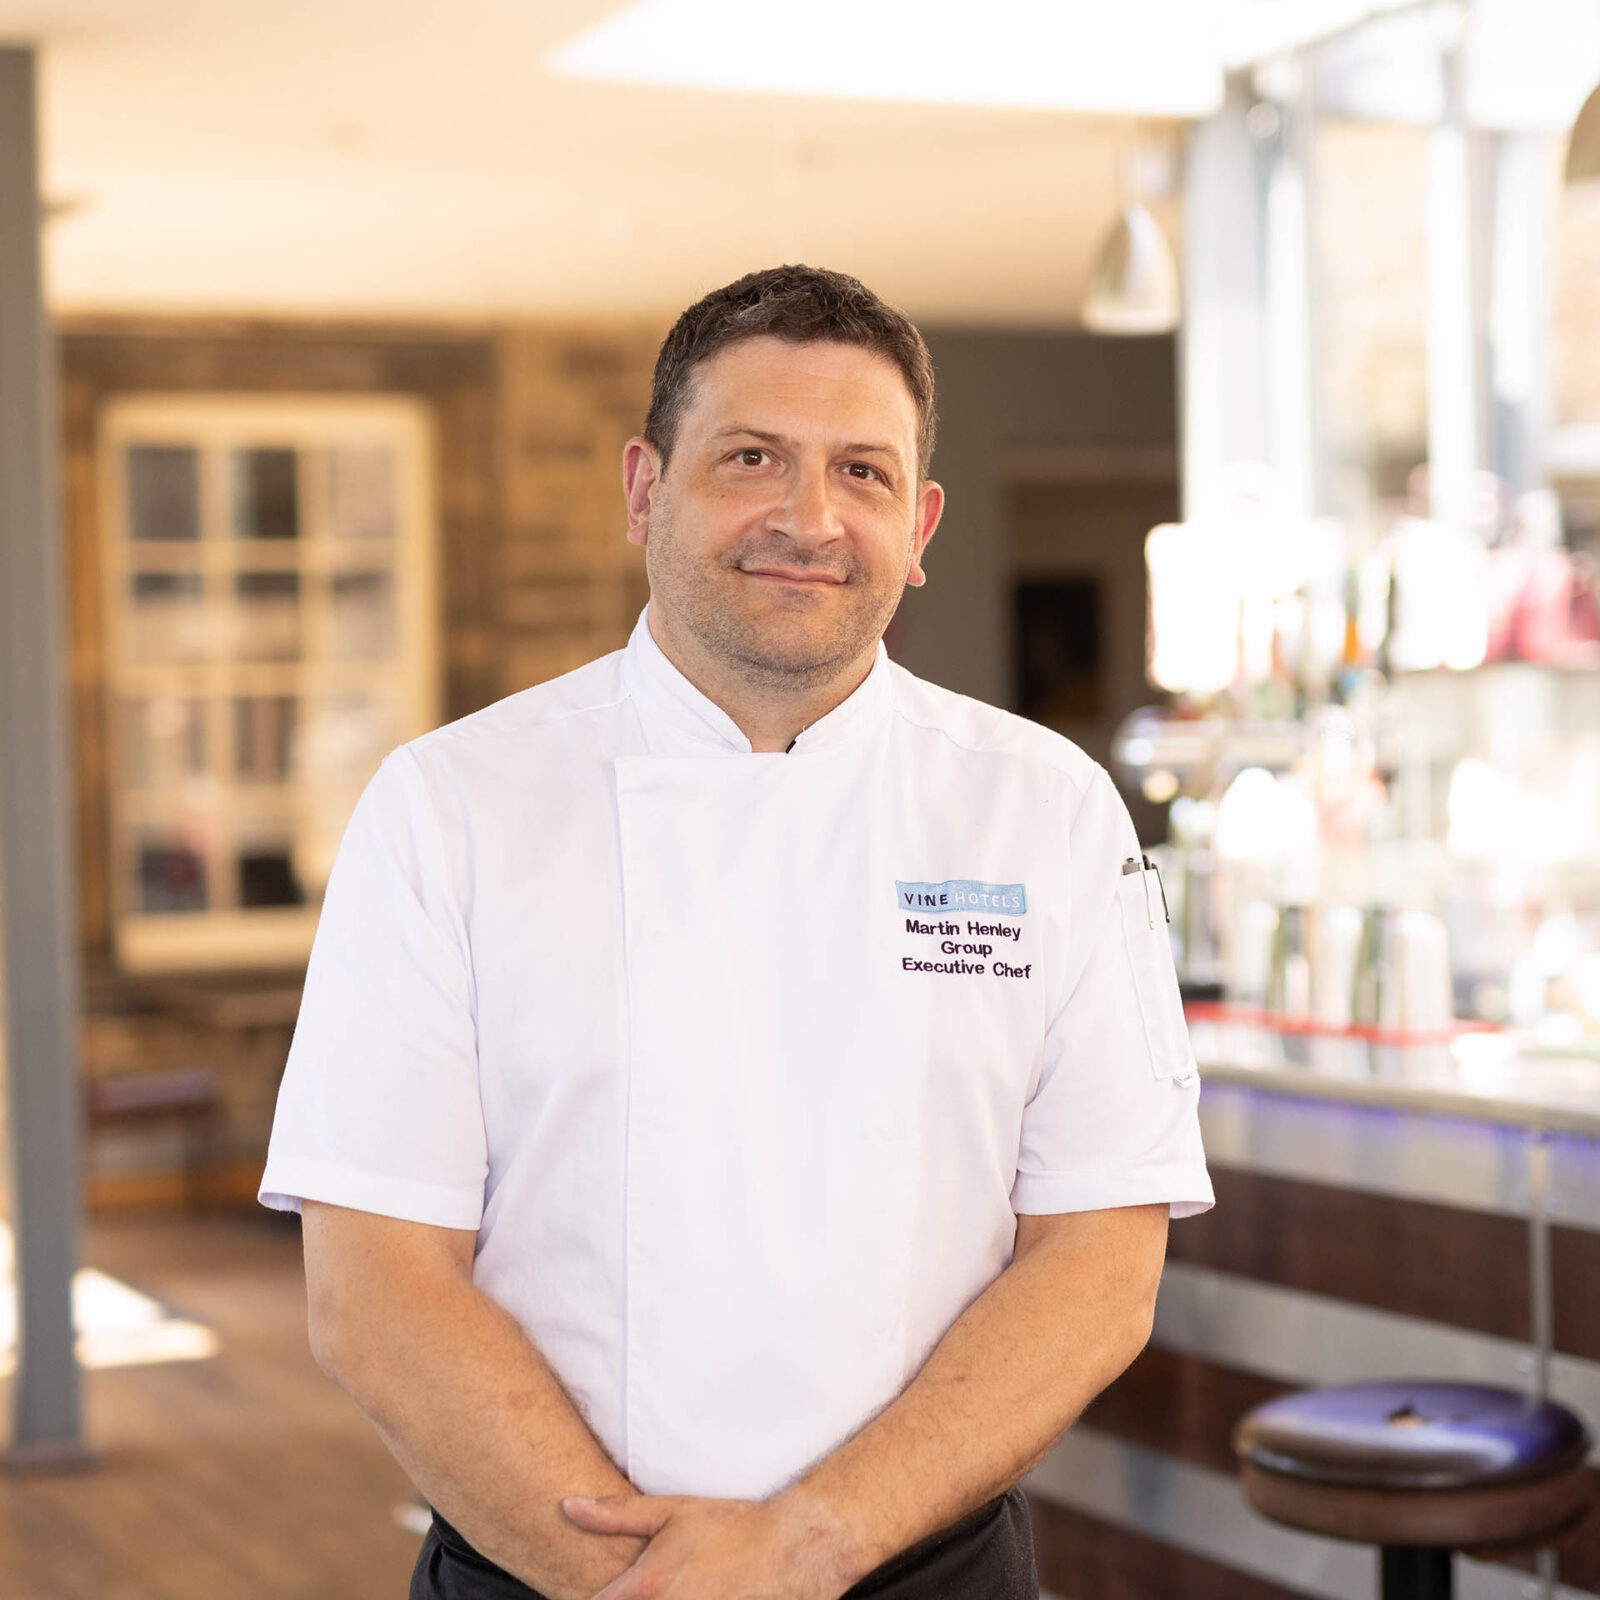 Martin Henley Group Executive Chef Vine Hotels